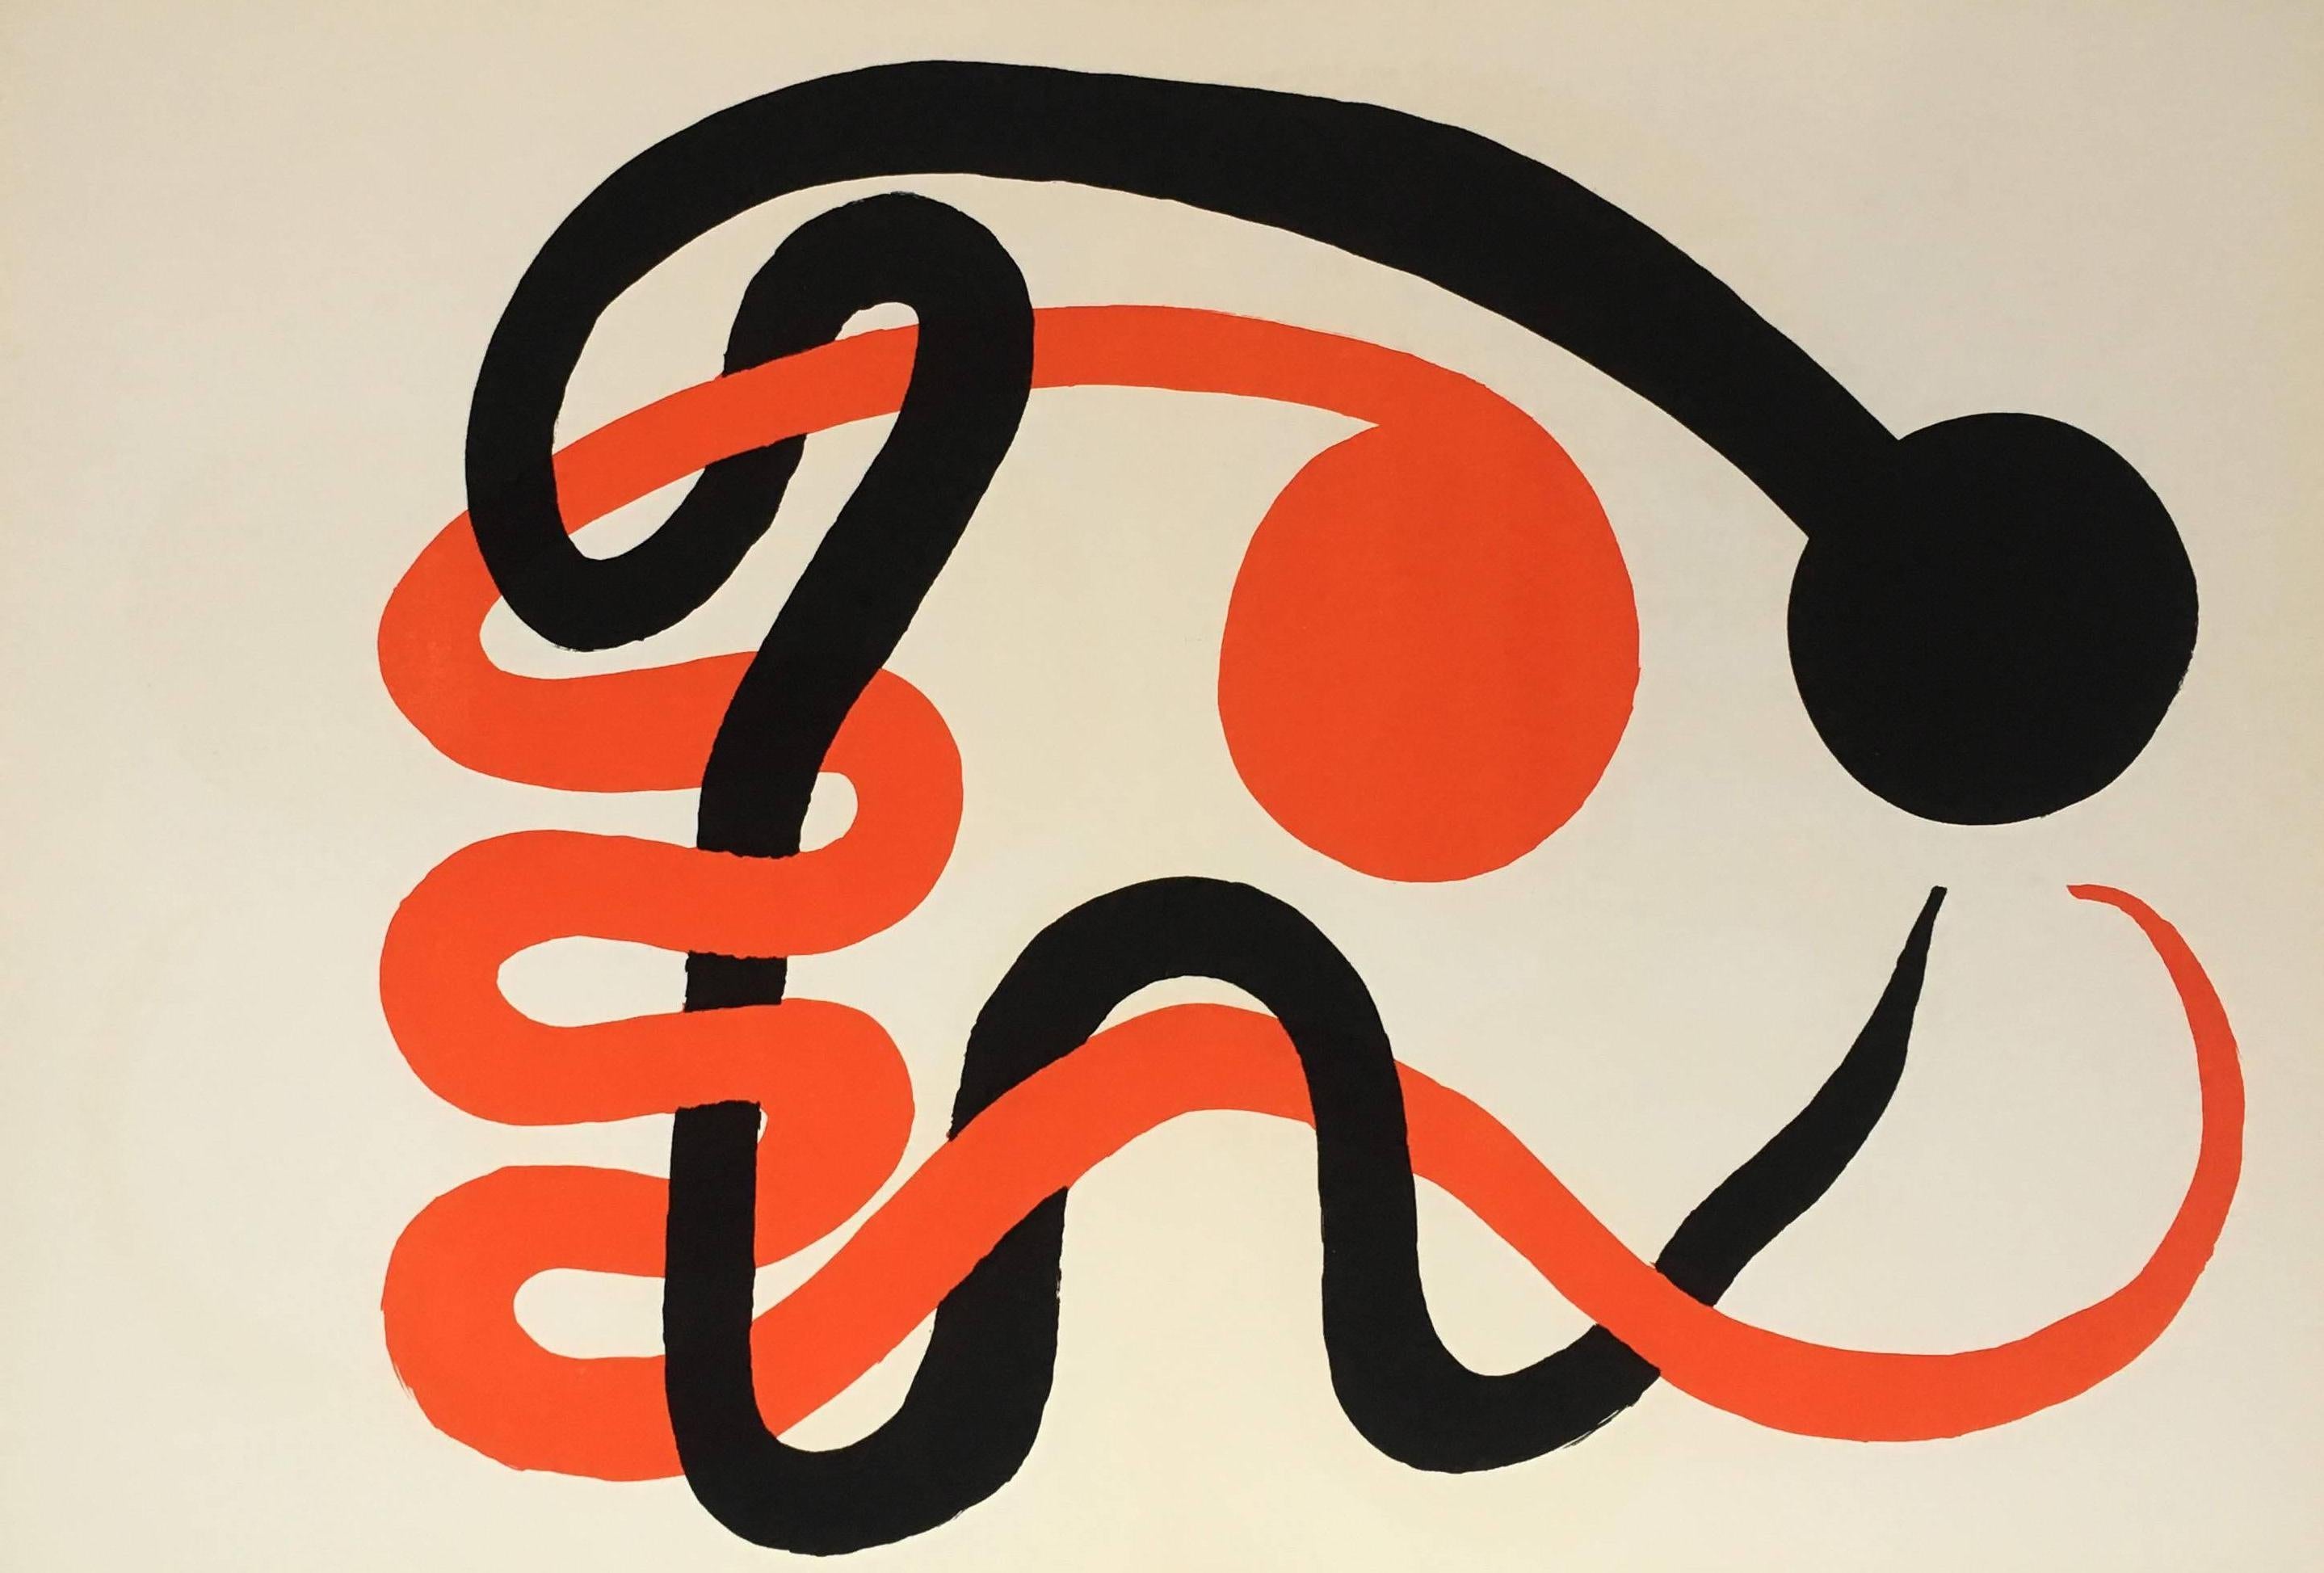 Vintage Alexander Calder Serpents Lithograph 
Published by: Galerie Maeght, Paris, 1973
Portfolio: Derrière le miroir
Excellent frame piece

Lithograph in colors; 1973
11 x 15 inches
Minor fading; otherwise excellent condition 
Unsigned from an